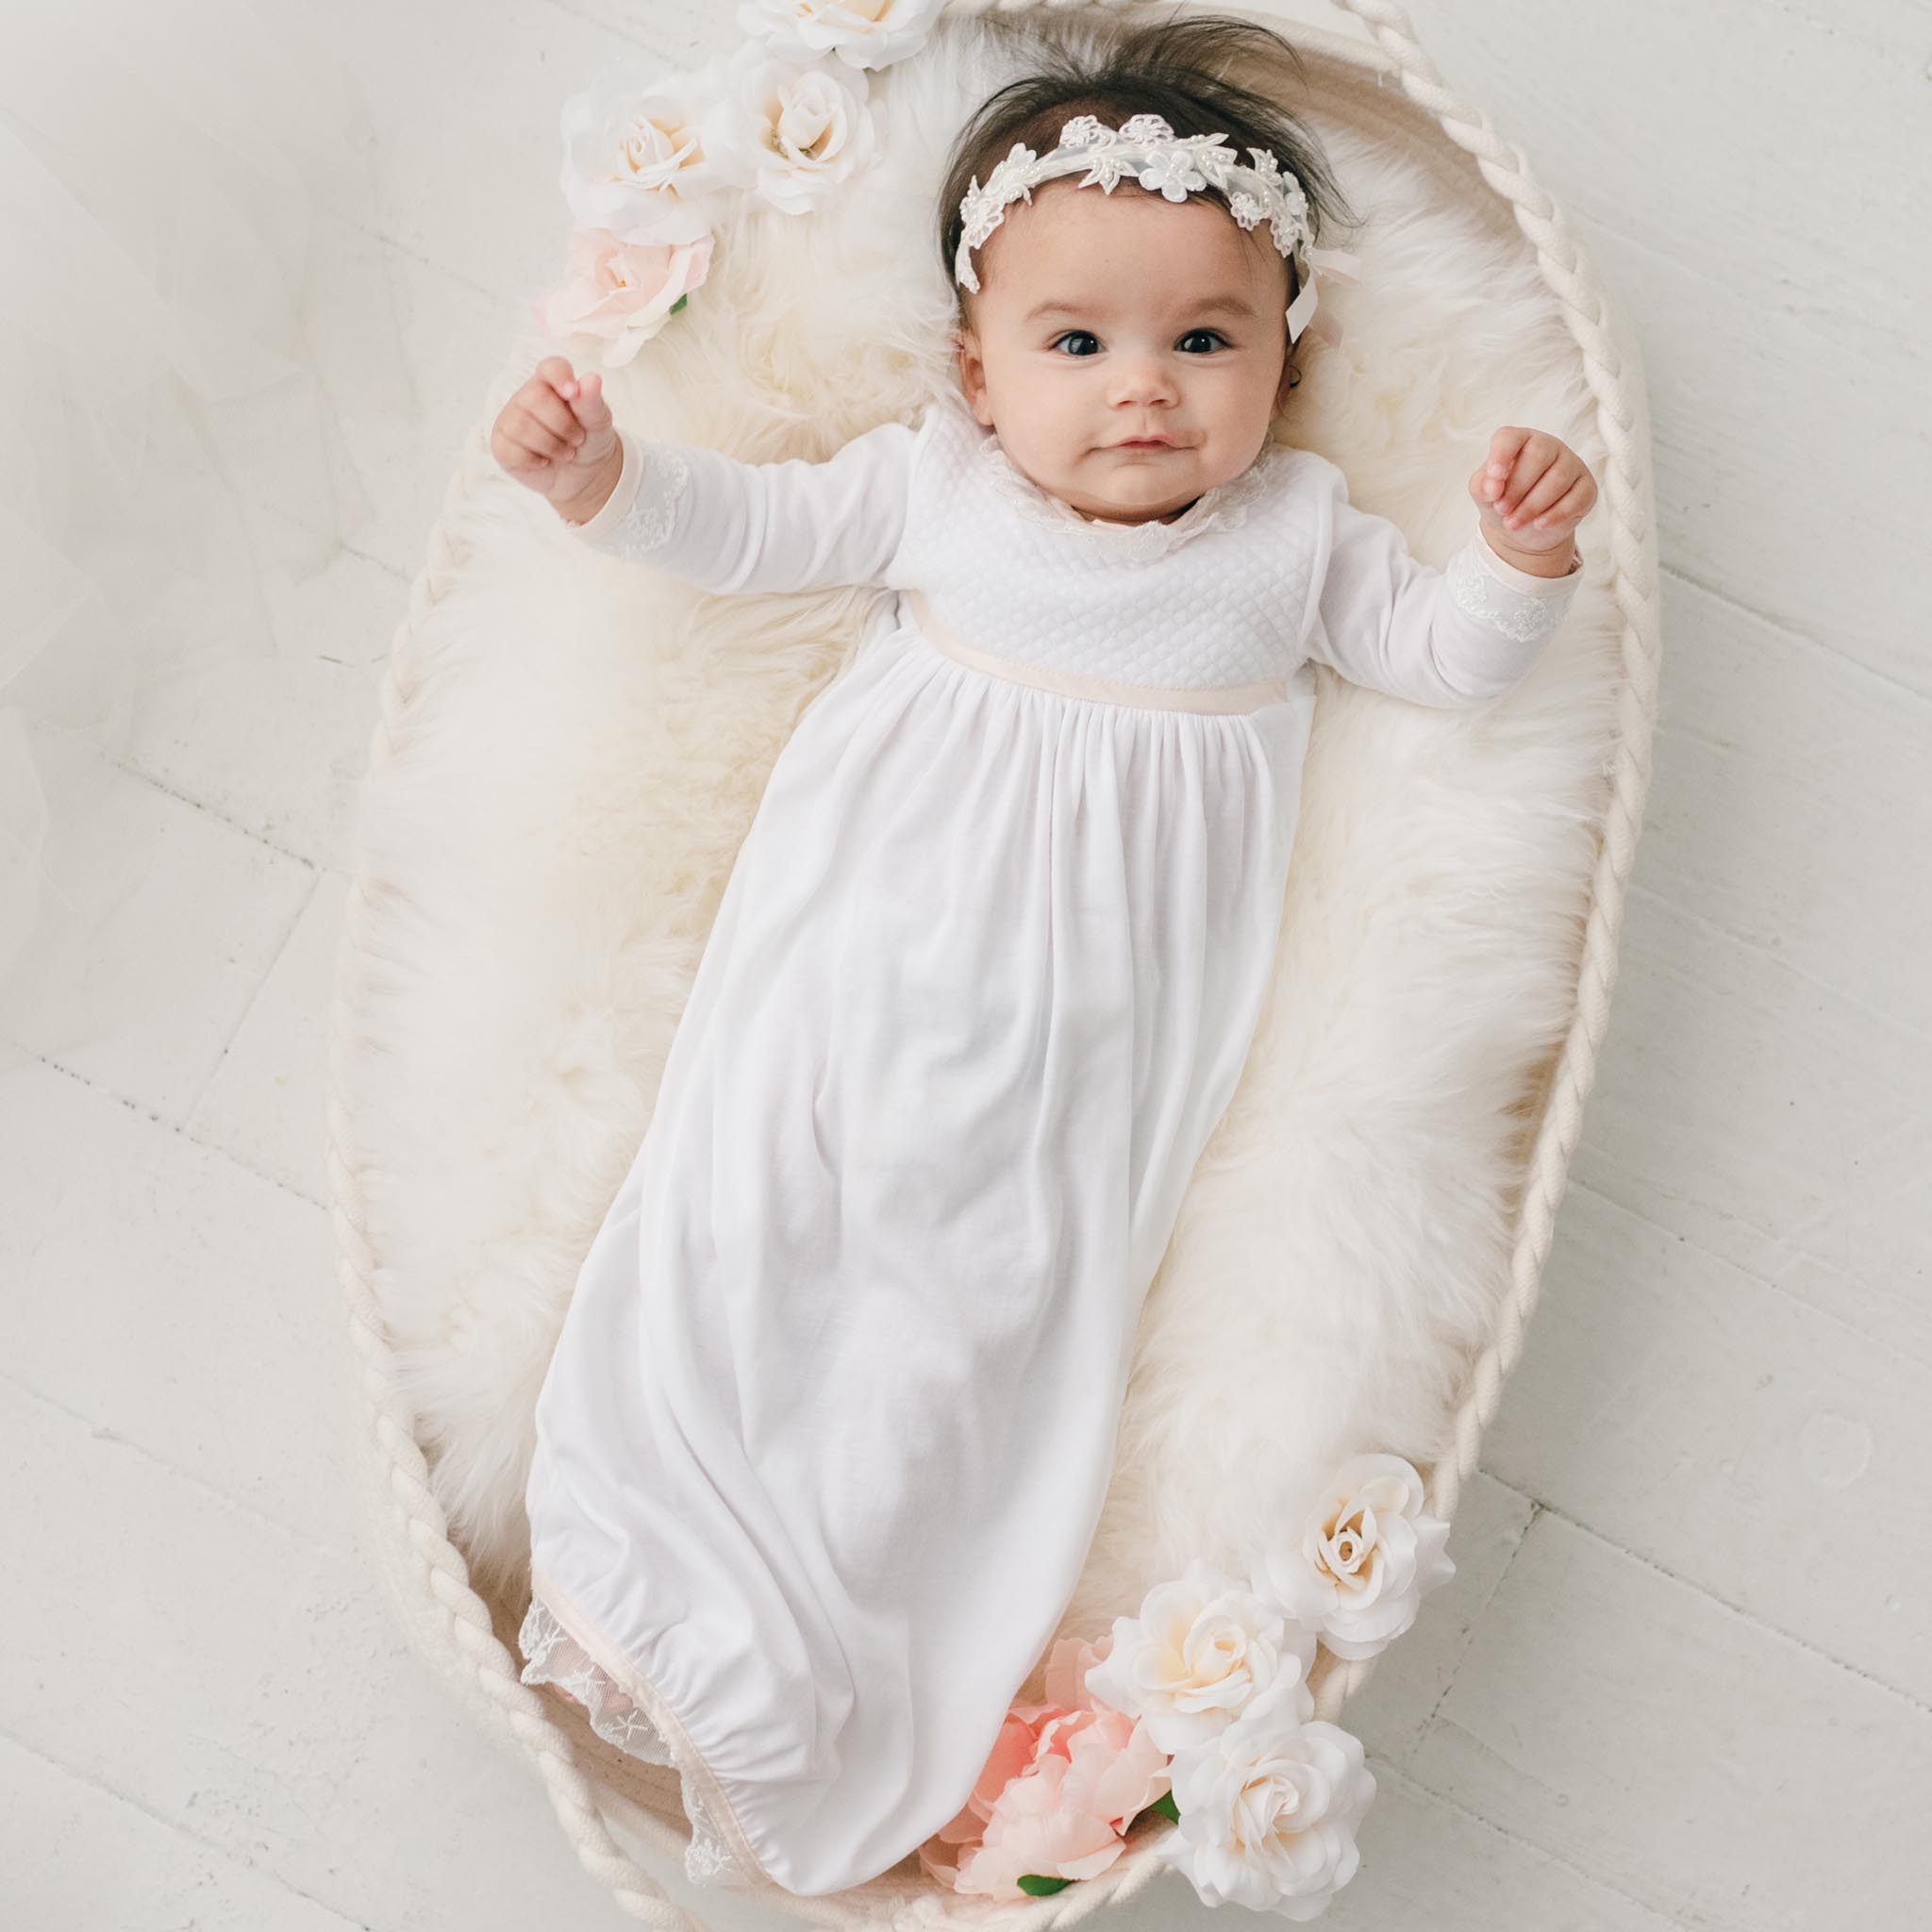 A baby girl in a white dress and a hat. Baby cute moe, people. - PICRYL -  Public Domain Media Search Engine Public Domain Search